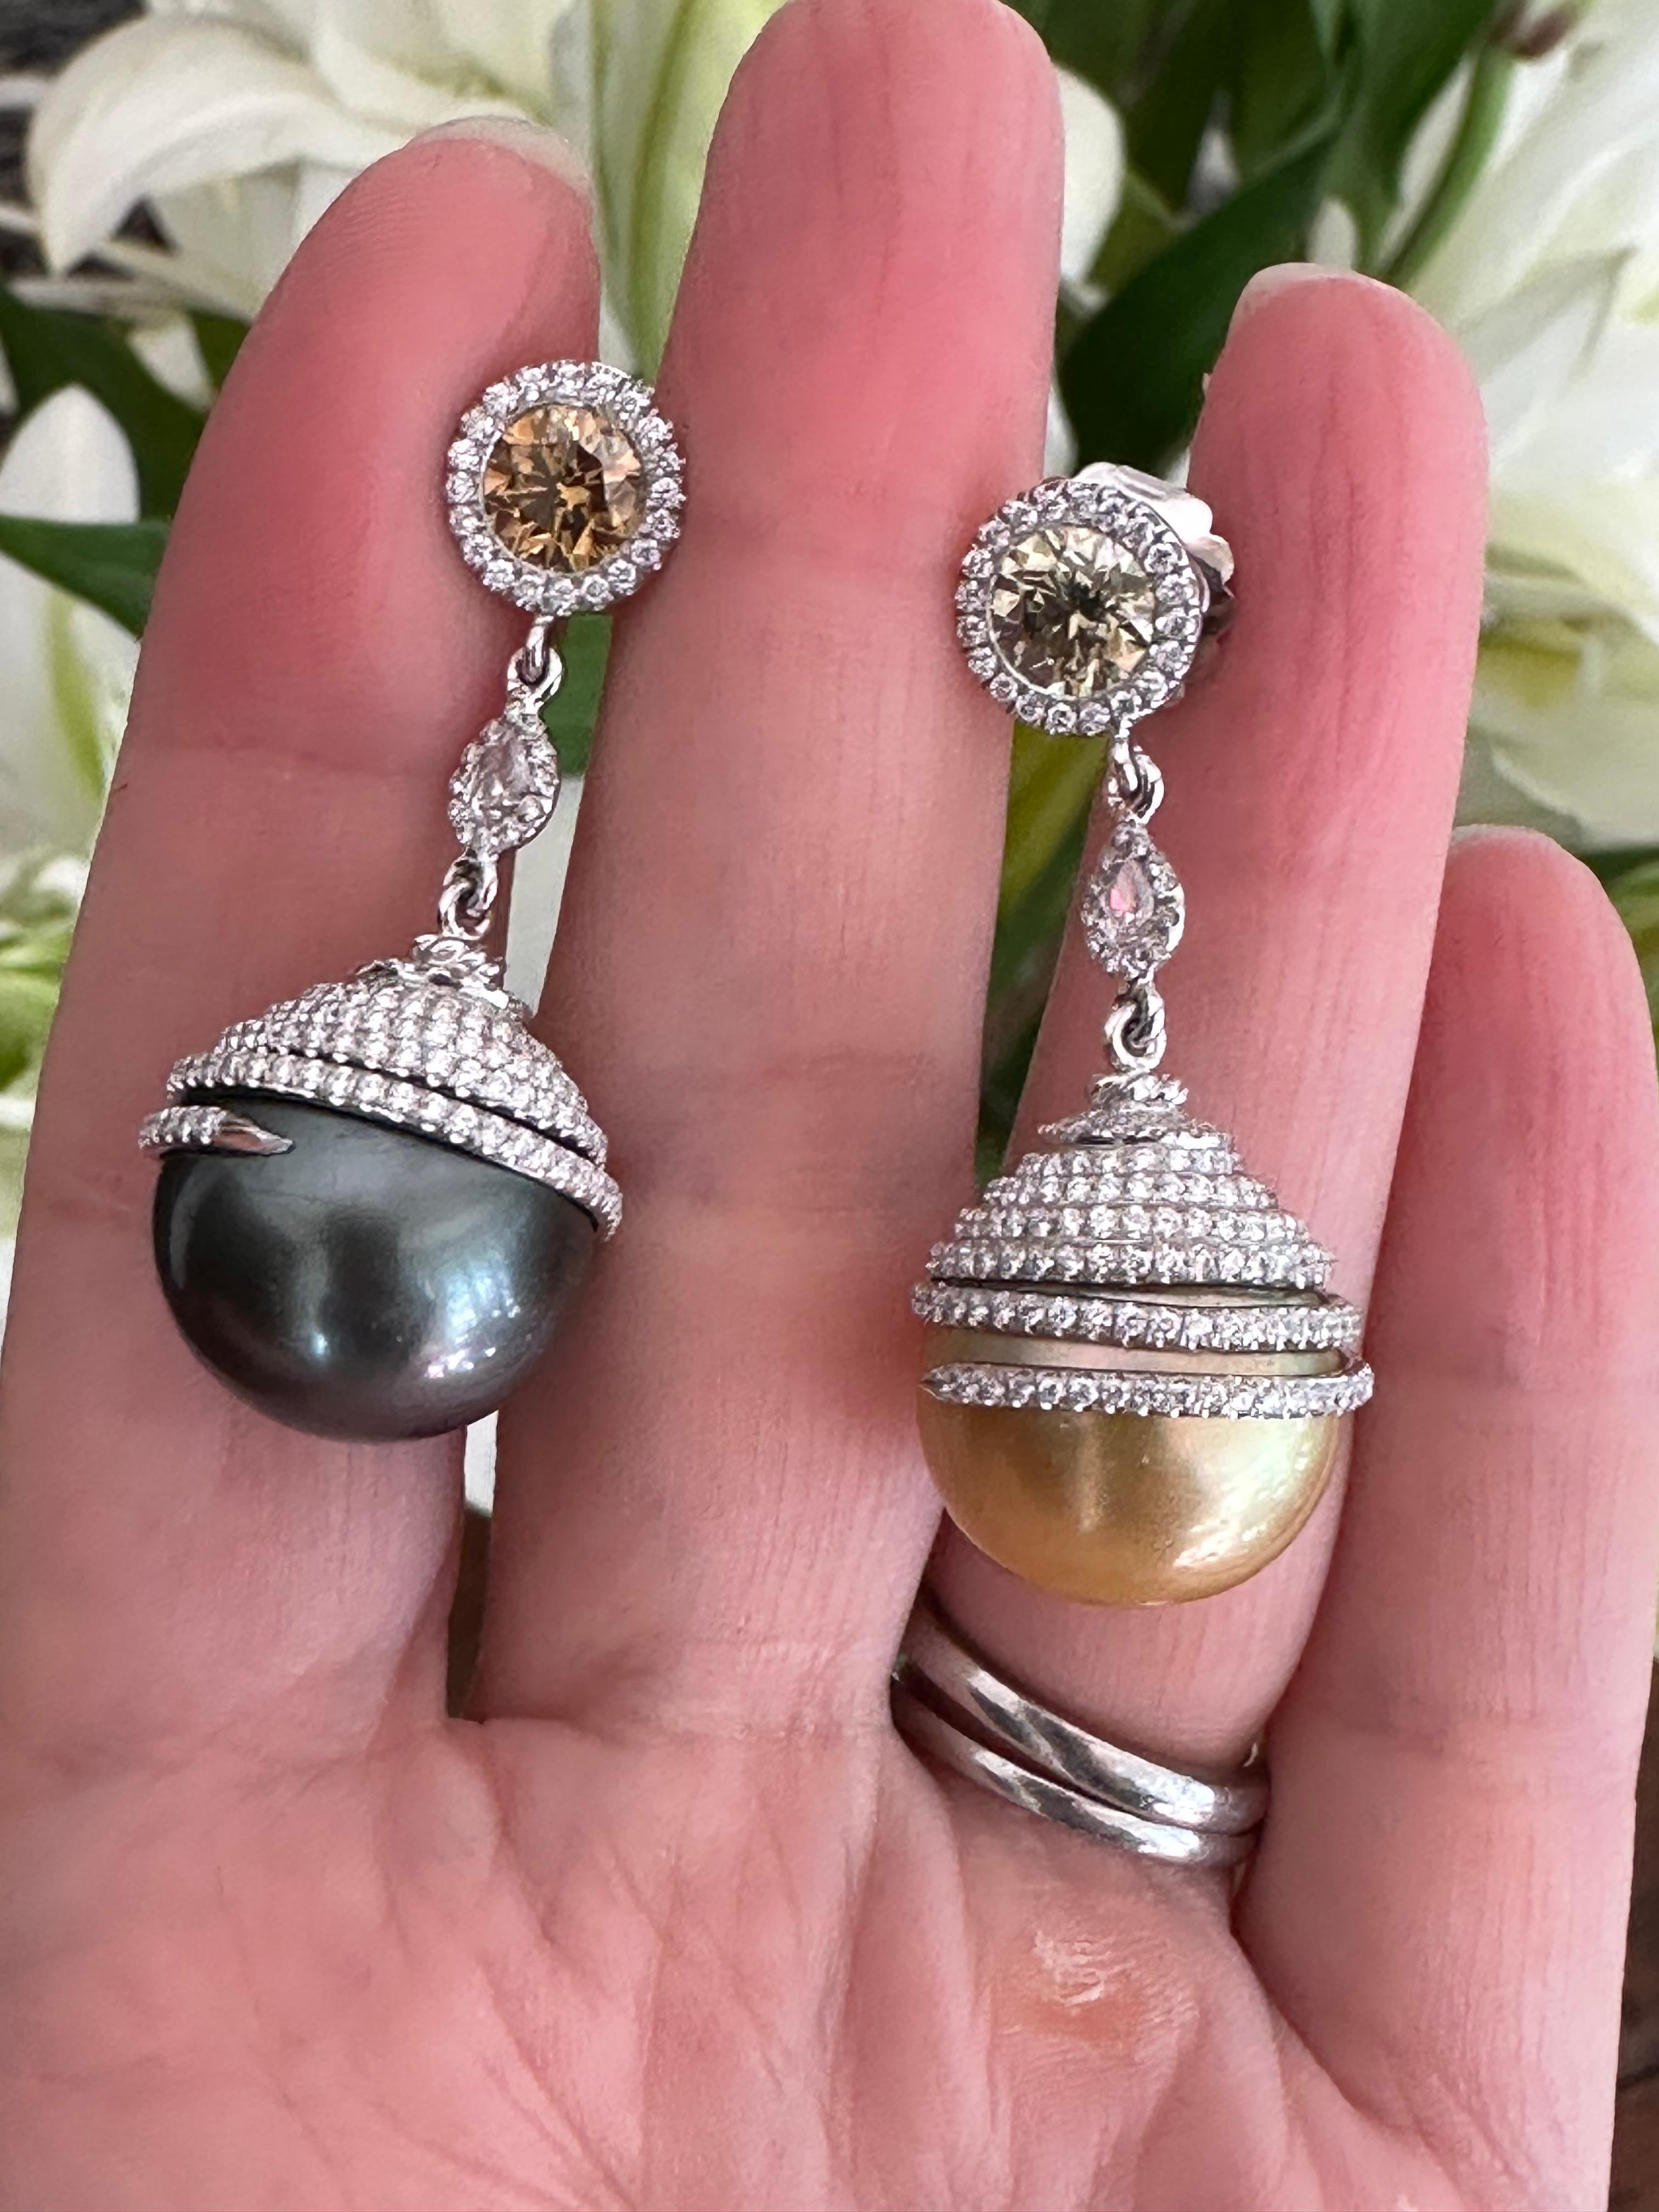 These exquisite earrings feature two large, luminous GIA-certified natural saltwater pearls.  Farmed from the pinctada margaritifera, or black-lipped oyster, and the pinctada maxima, the gold-lipped pearl oyster, these large gems possess the most